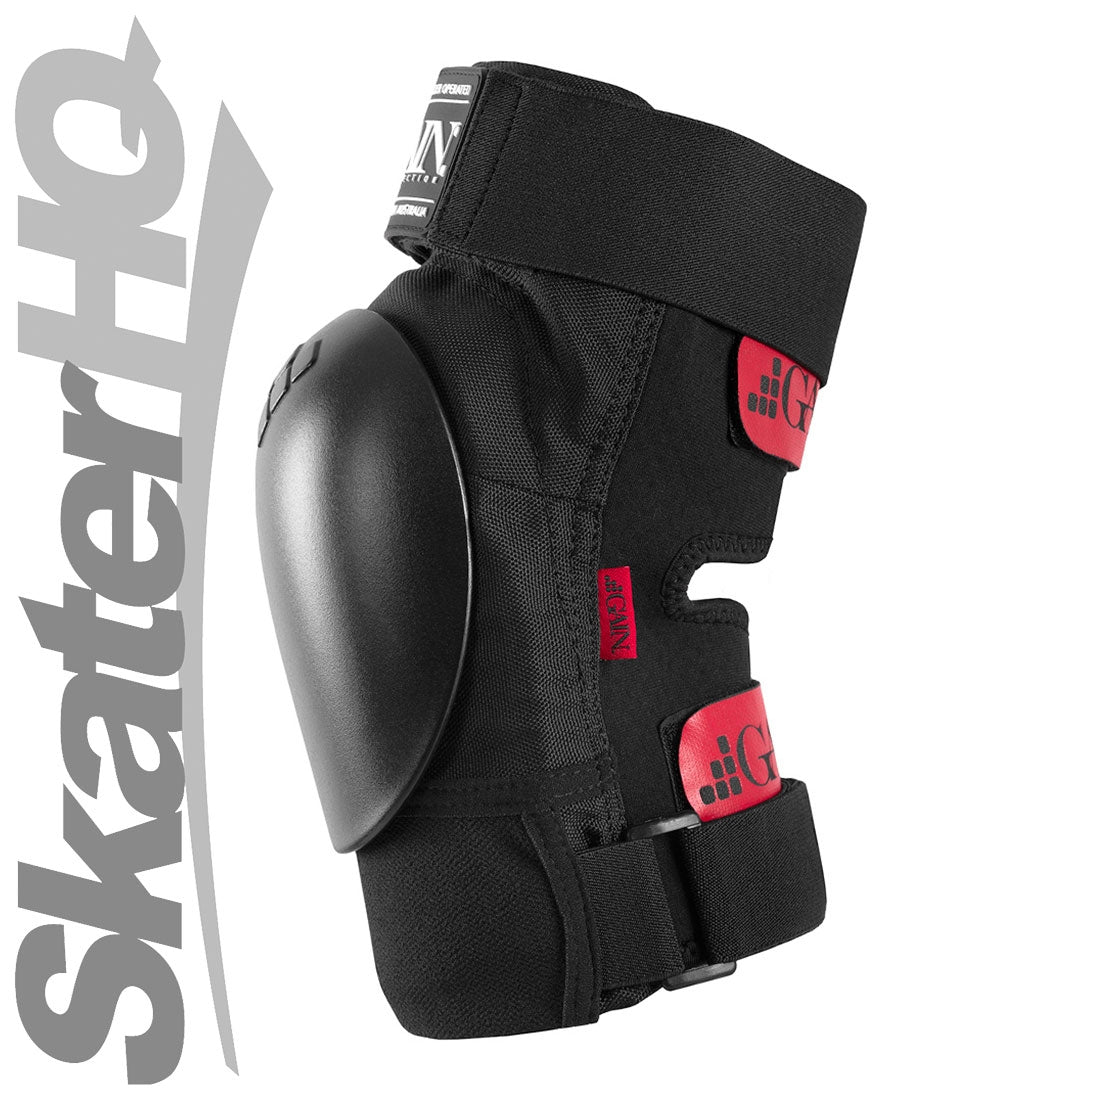 GAIN Shield Knee Pads - Black - S Protective Gear